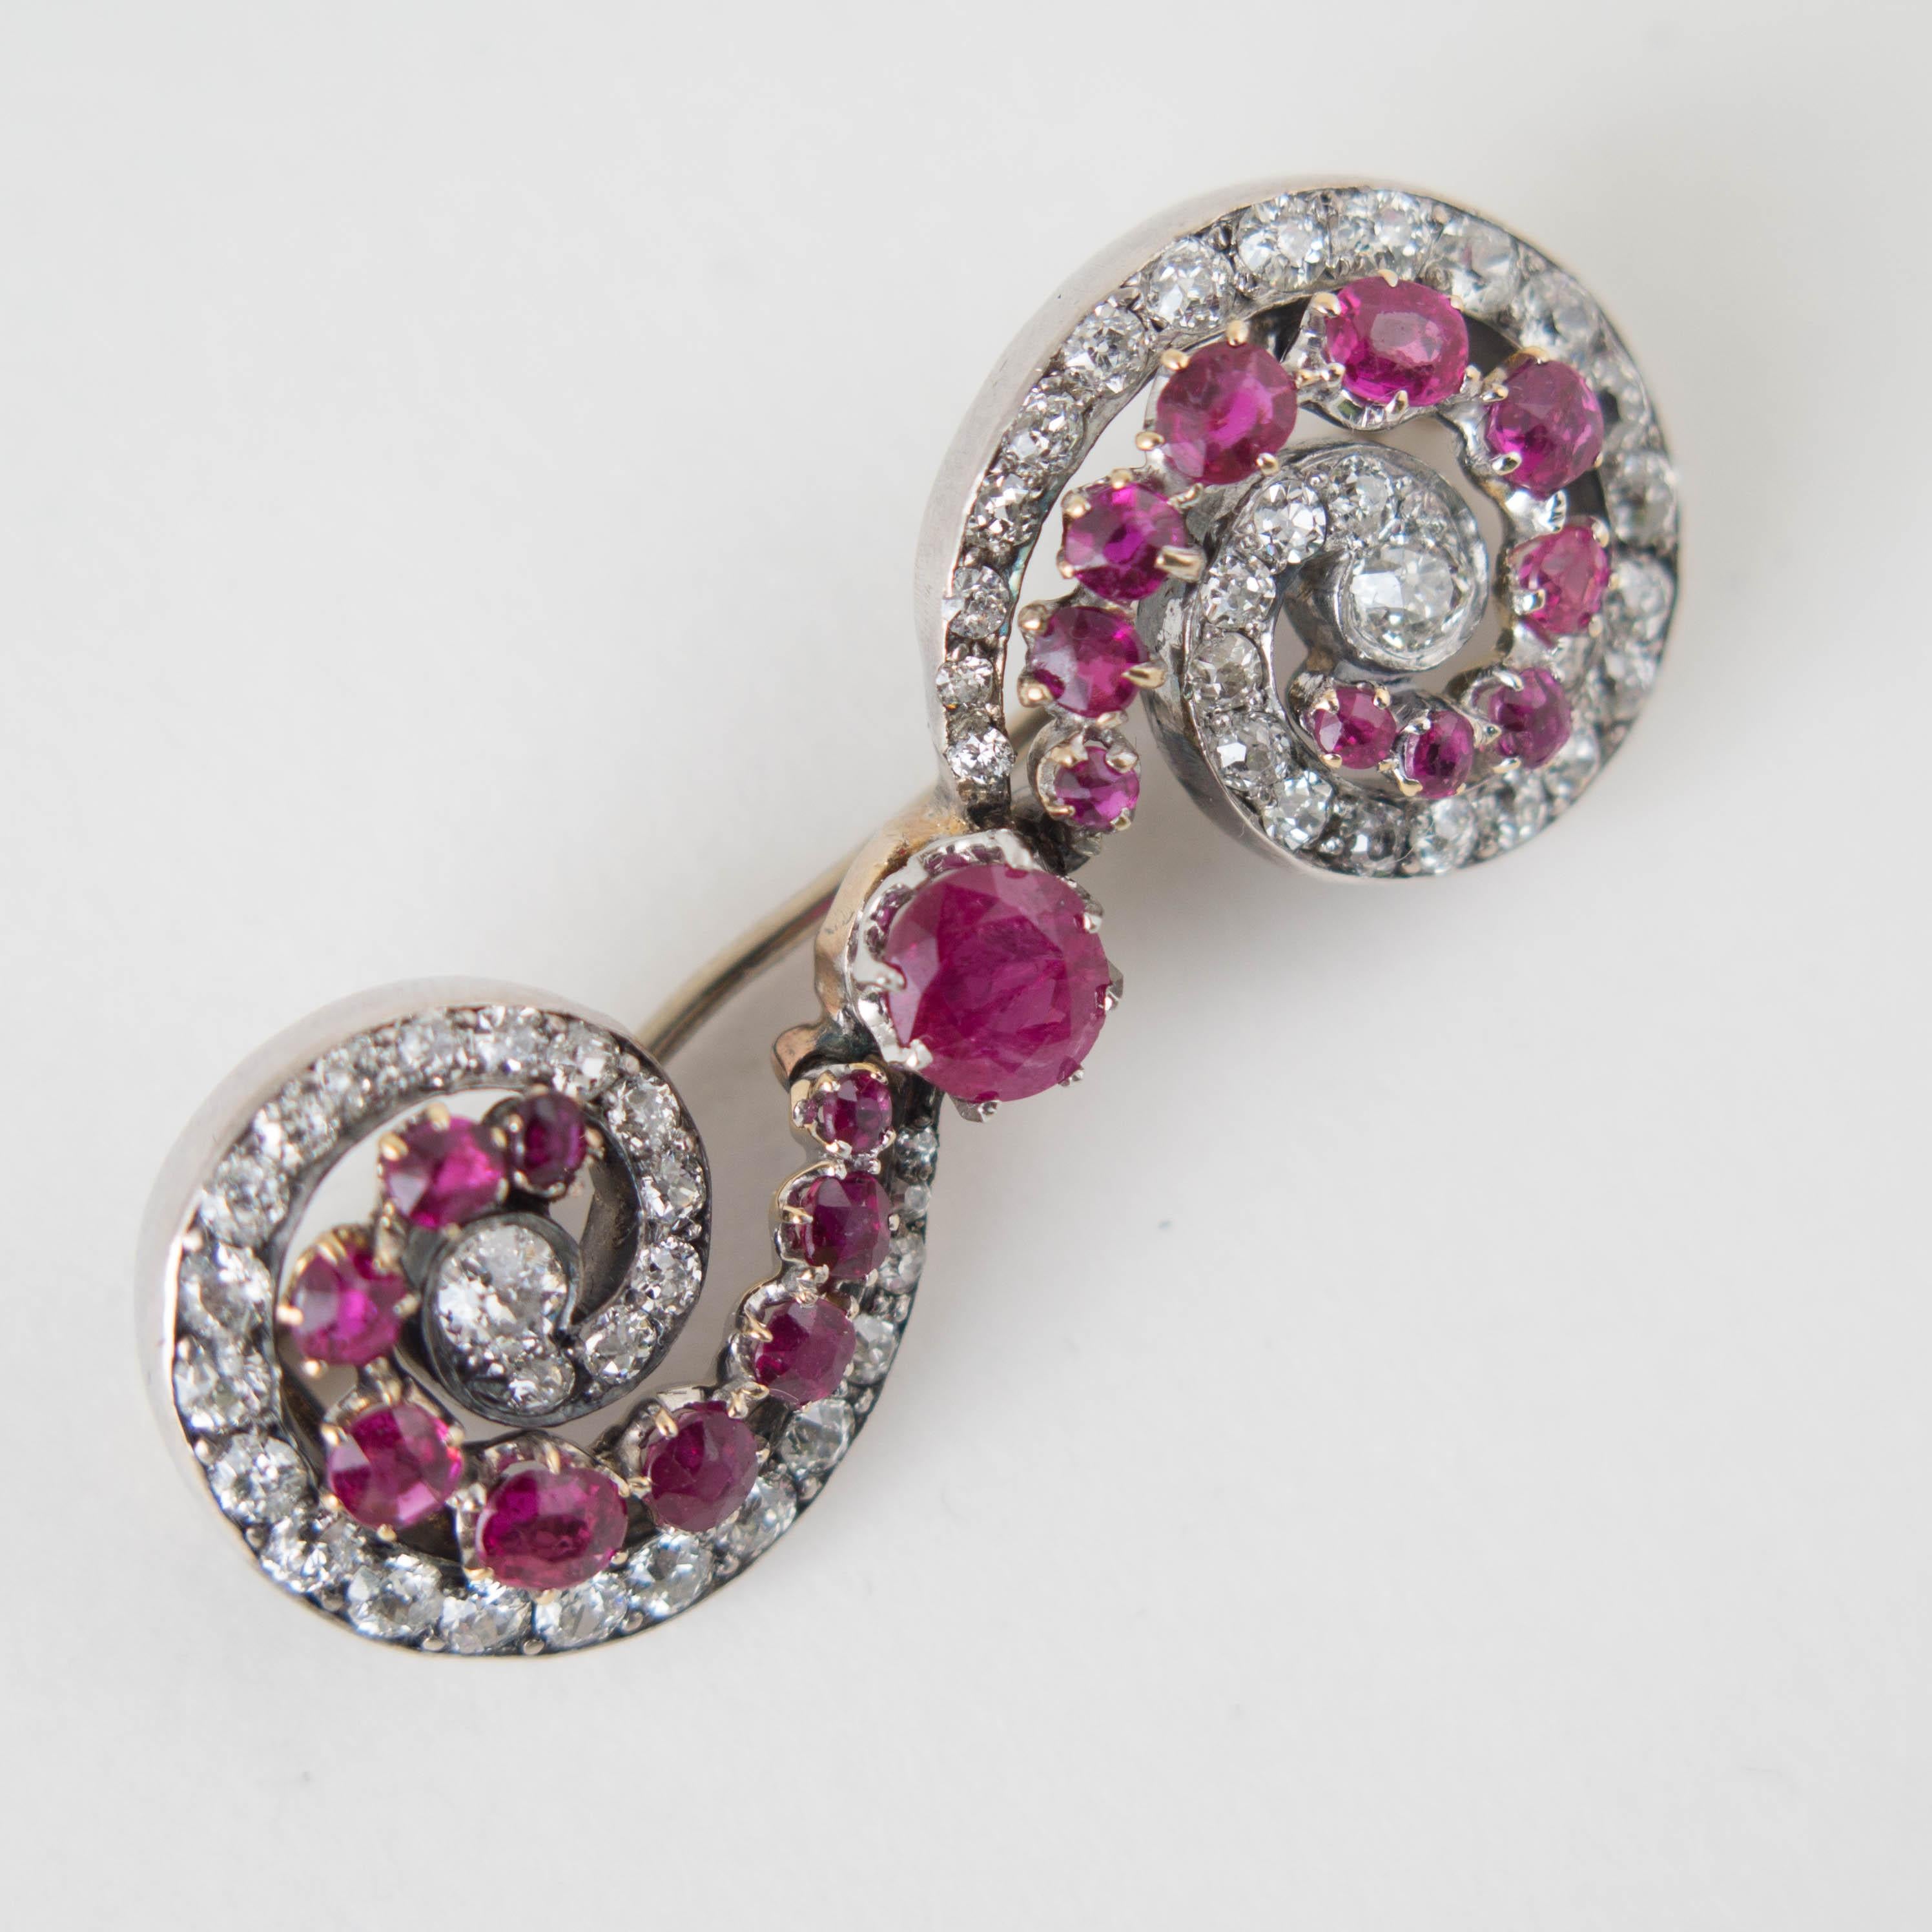 Antique Cushion Cut Victorian Ruby and Diamond Brooch, Late 19th Century For Sale